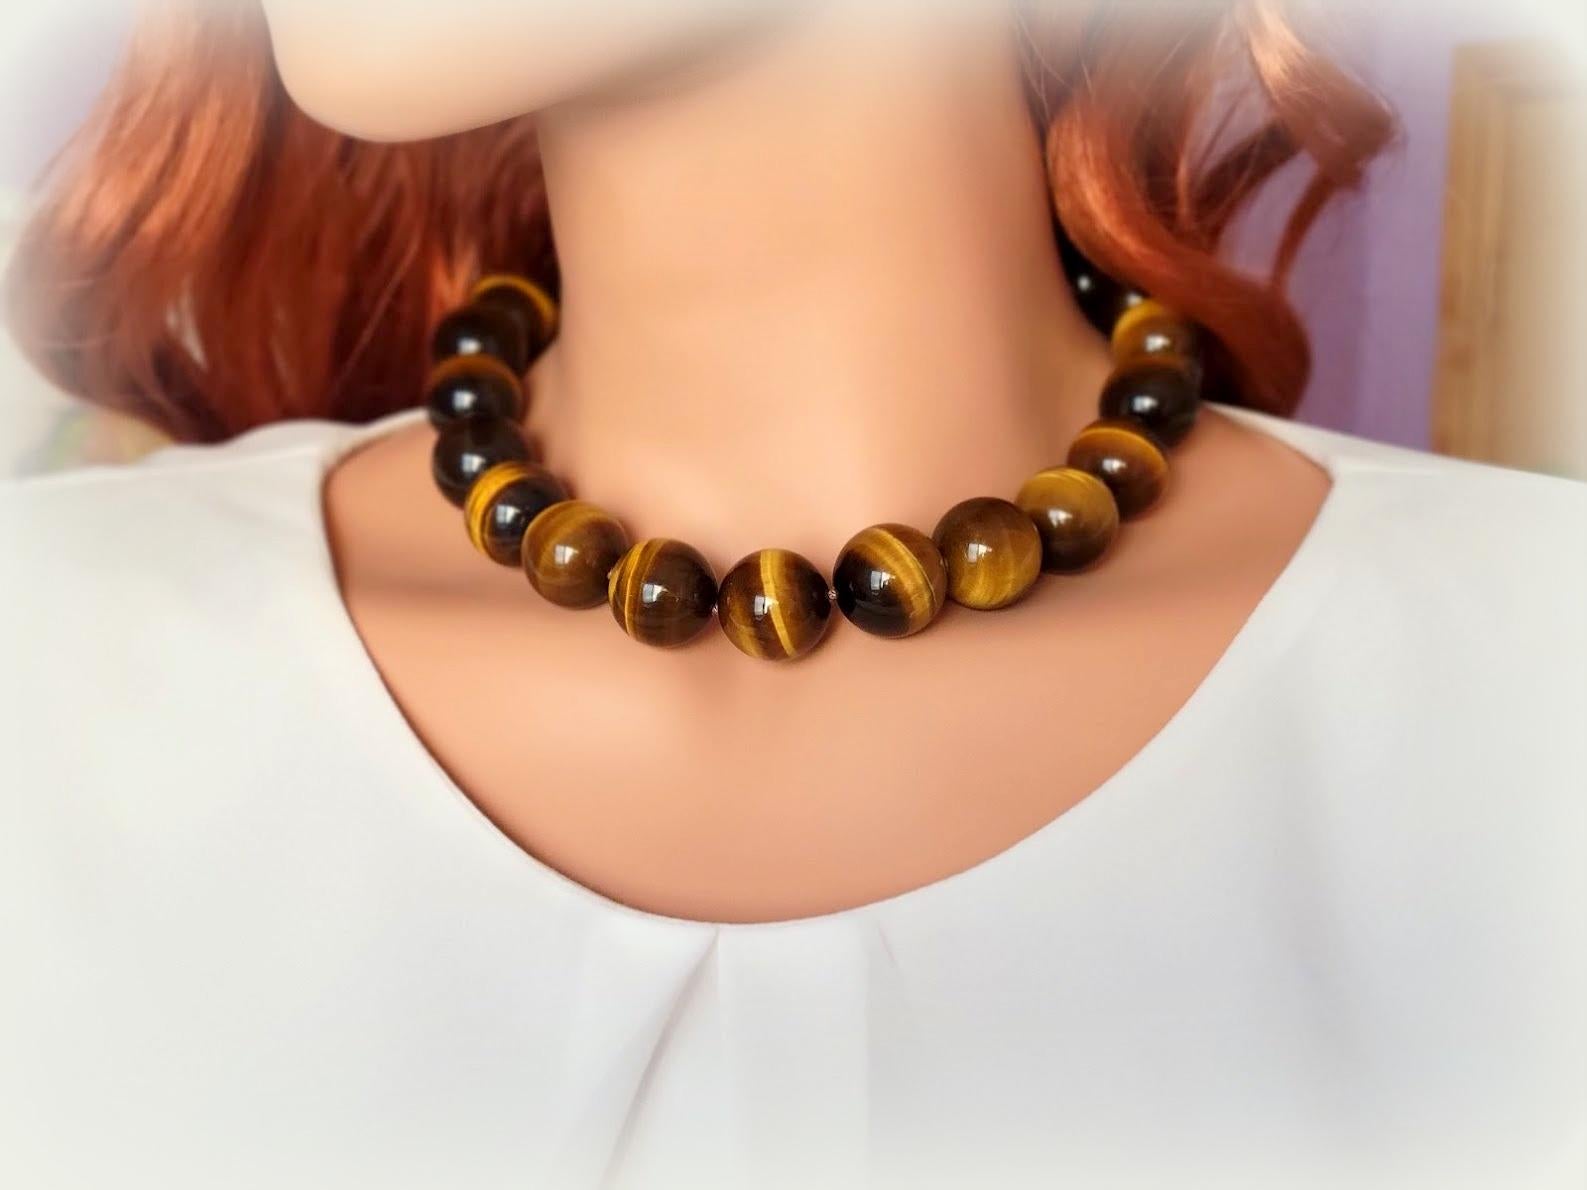 PEARLADA Long Turquoise Tiger Eye Beads Endless Necklaces Handmade Jewelry for Women 47.5 